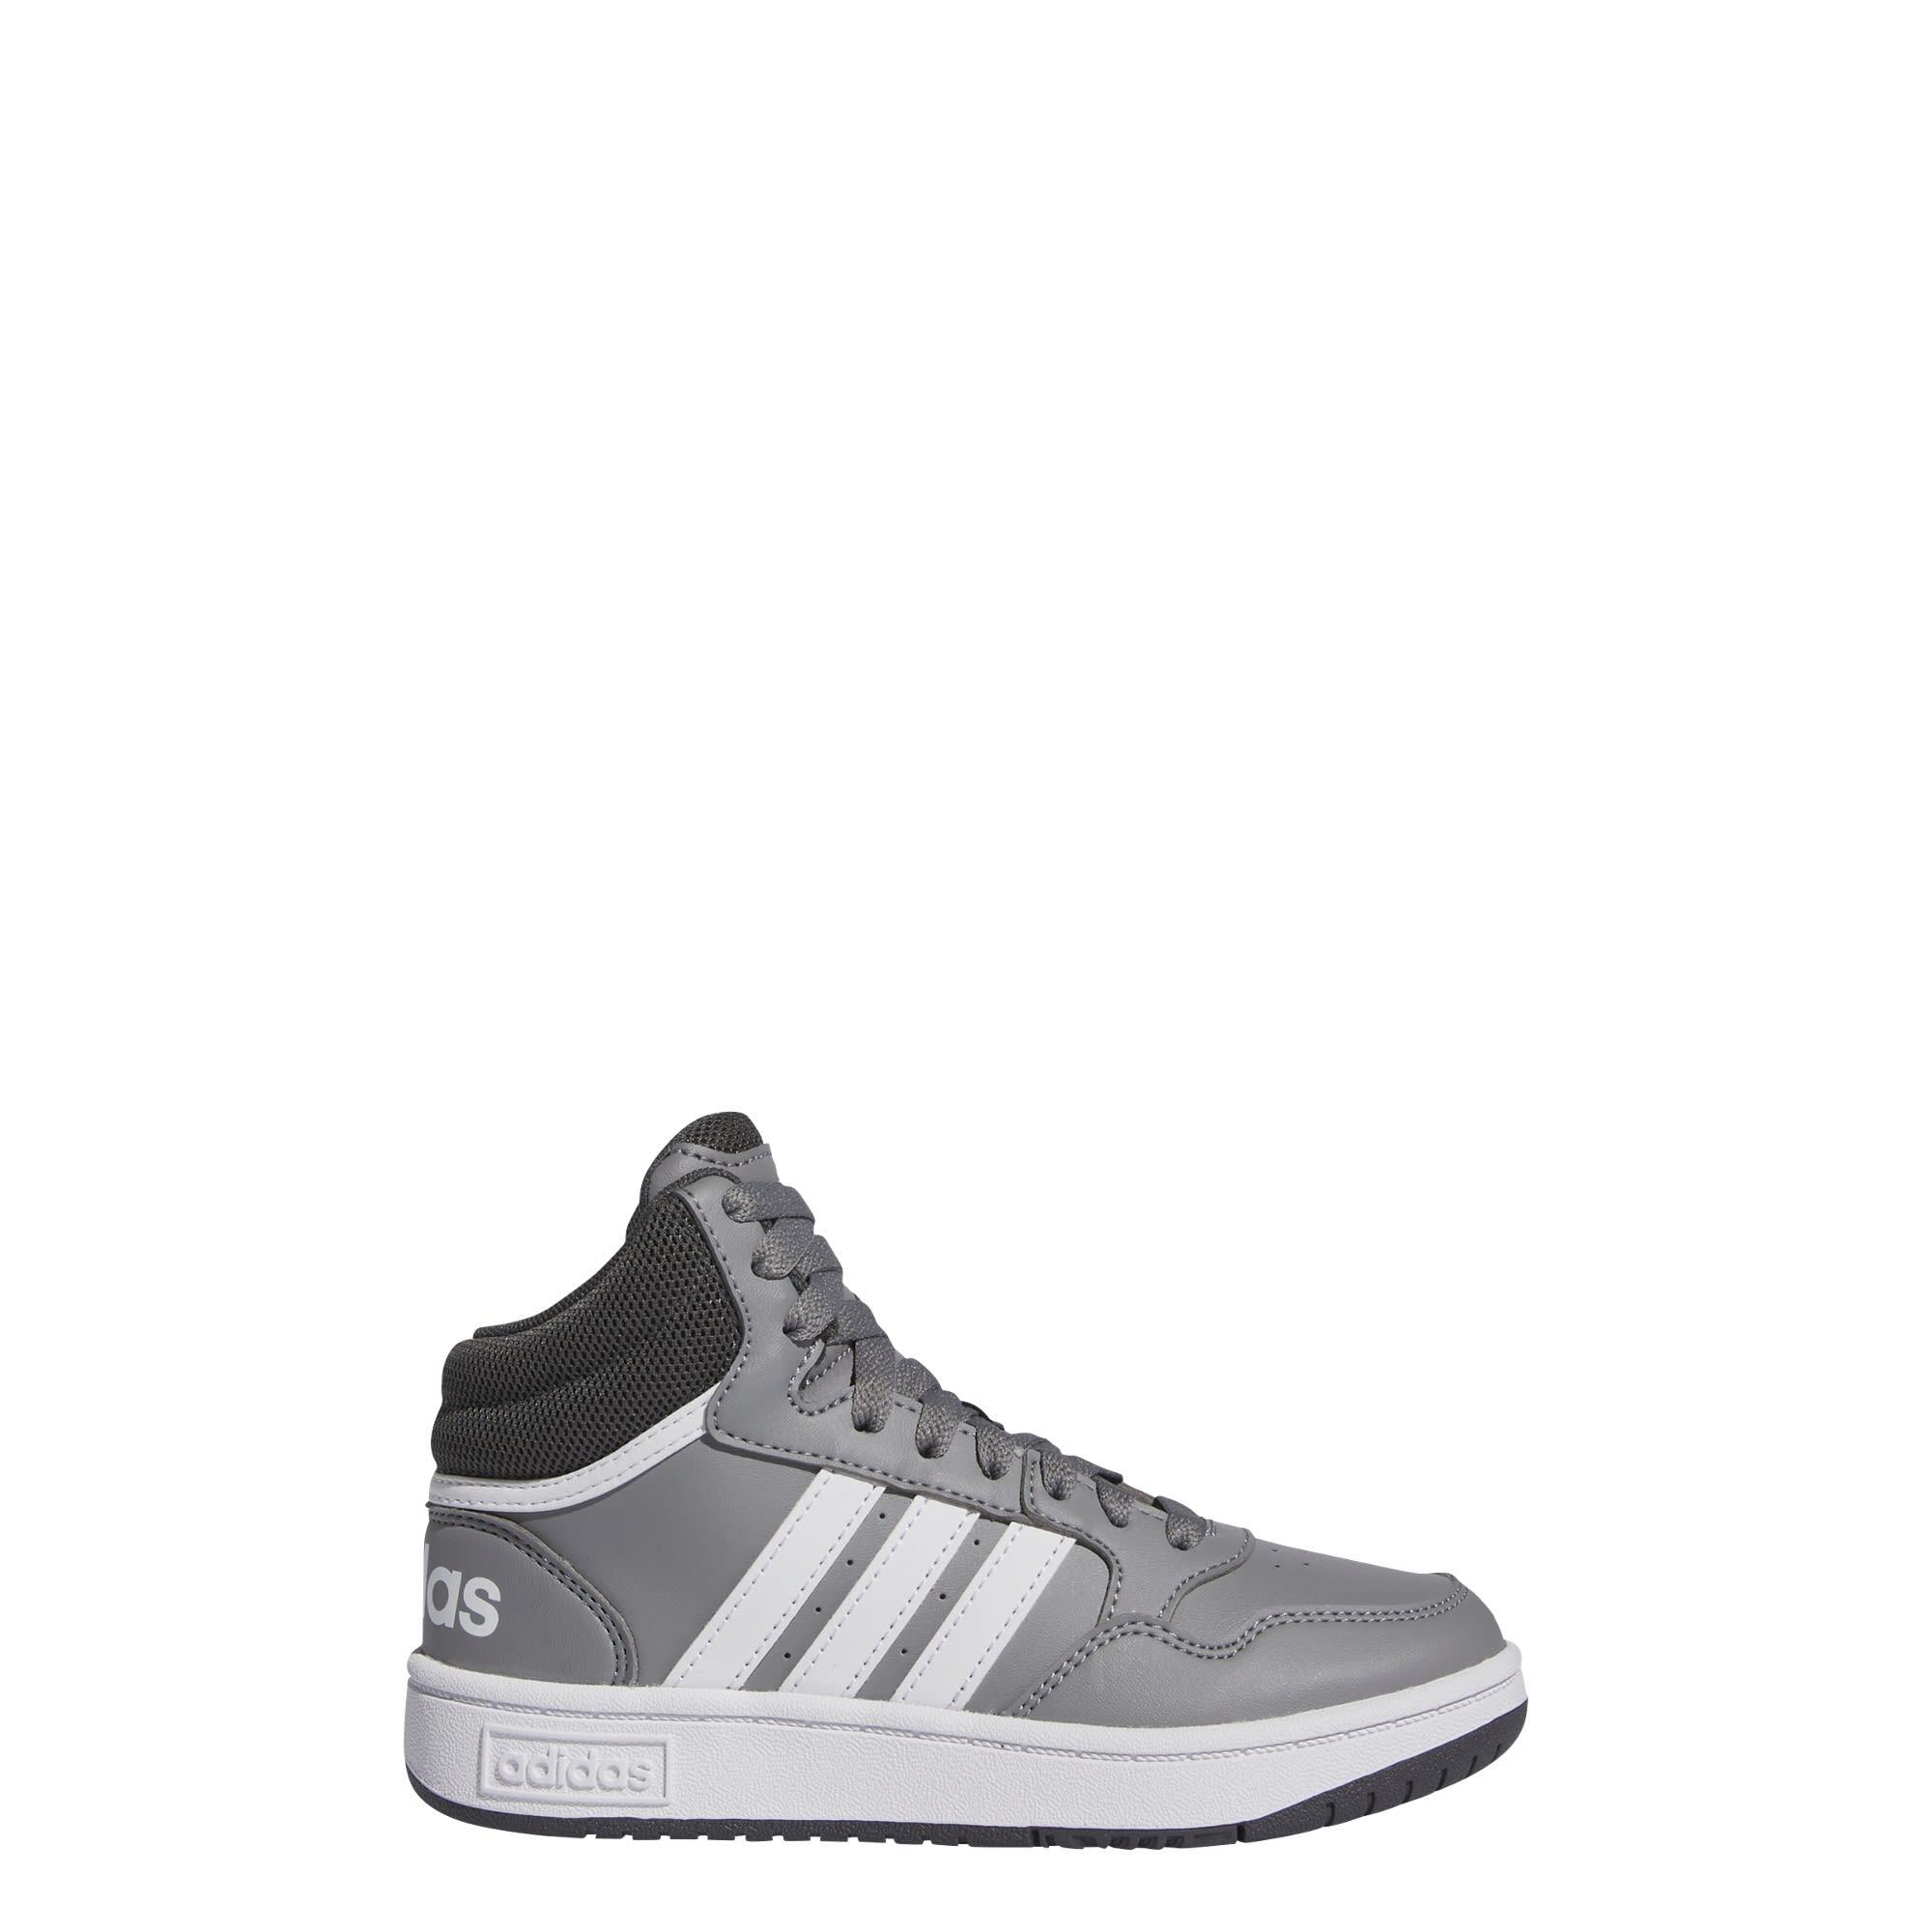 ADIDAS Hoops Mid Shoes